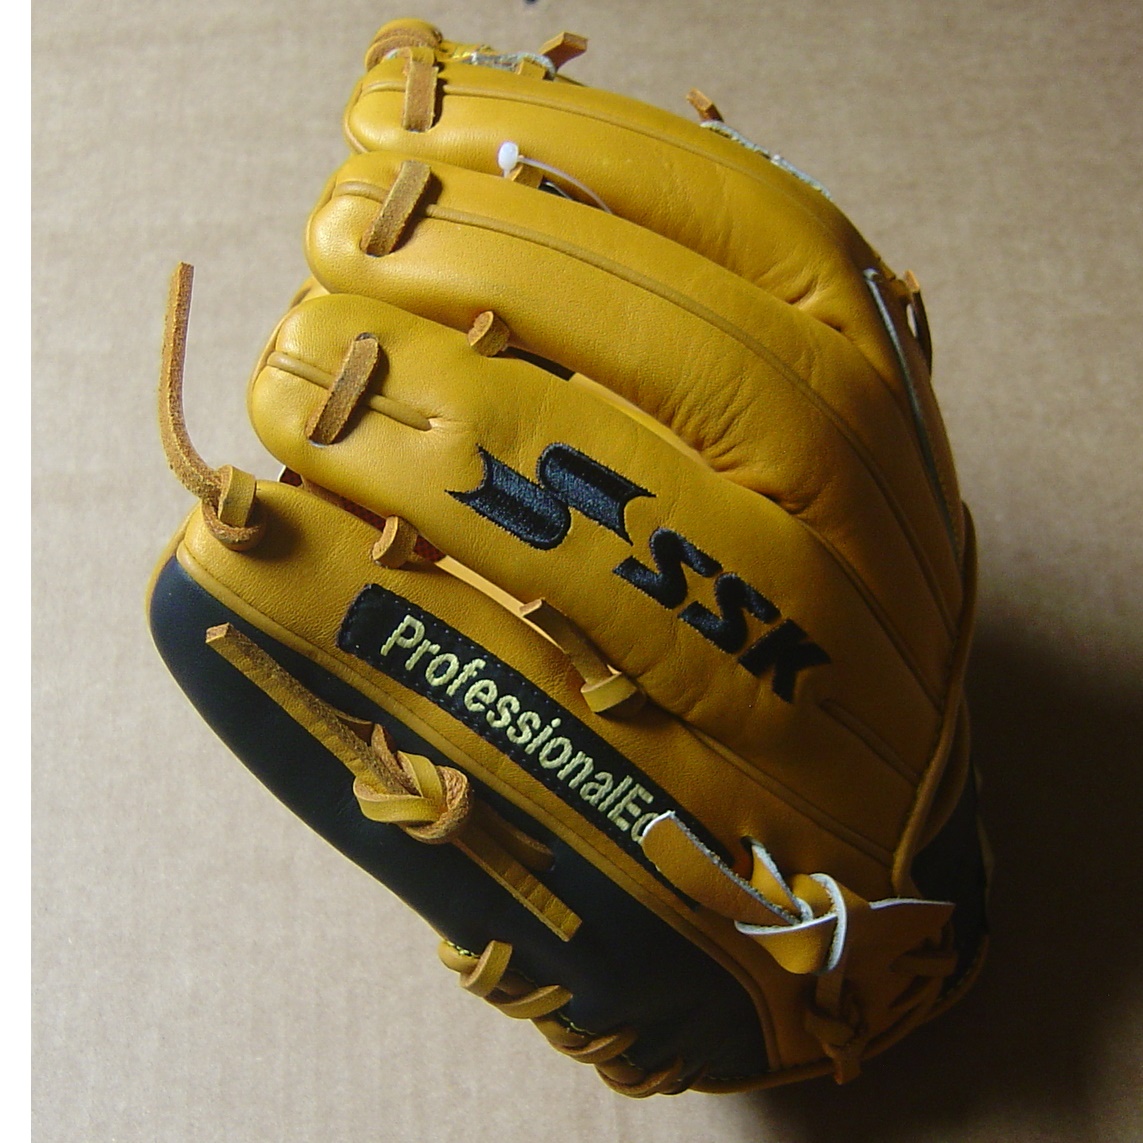 ssk-premier-pro-11-5-baseball-glove-right-hand-throw-i-web S16300CI-RightHandThrow SSK 083351458348 Culture Tradition Greatness. Words that describe SSK and their manufacturing process.